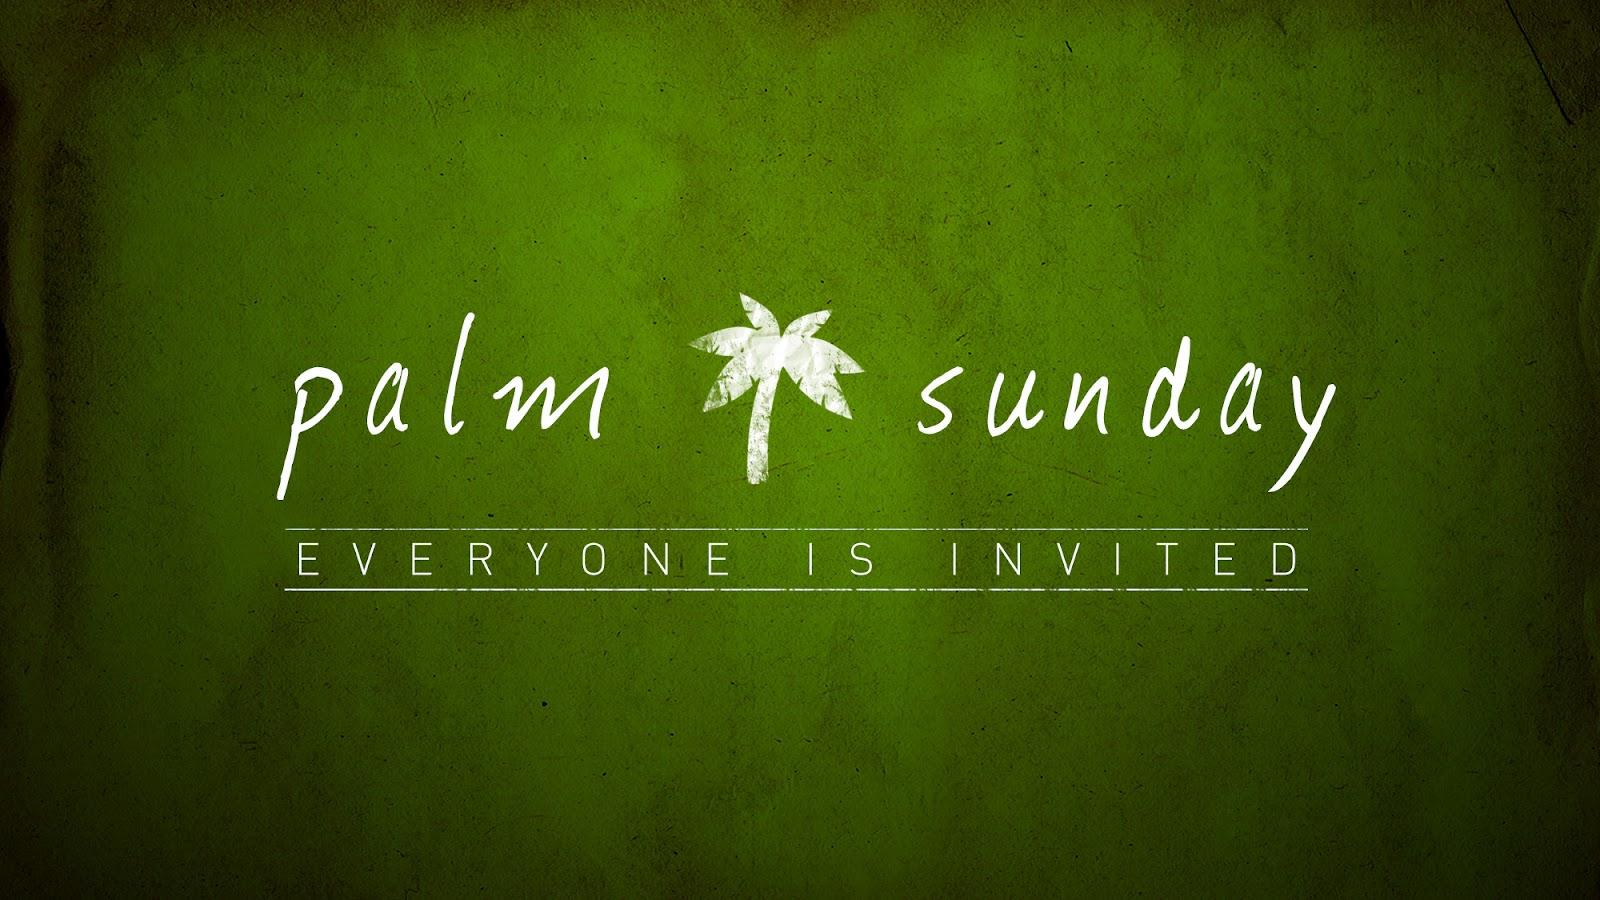 Palm Sunday 2017 Wish Picture And Image